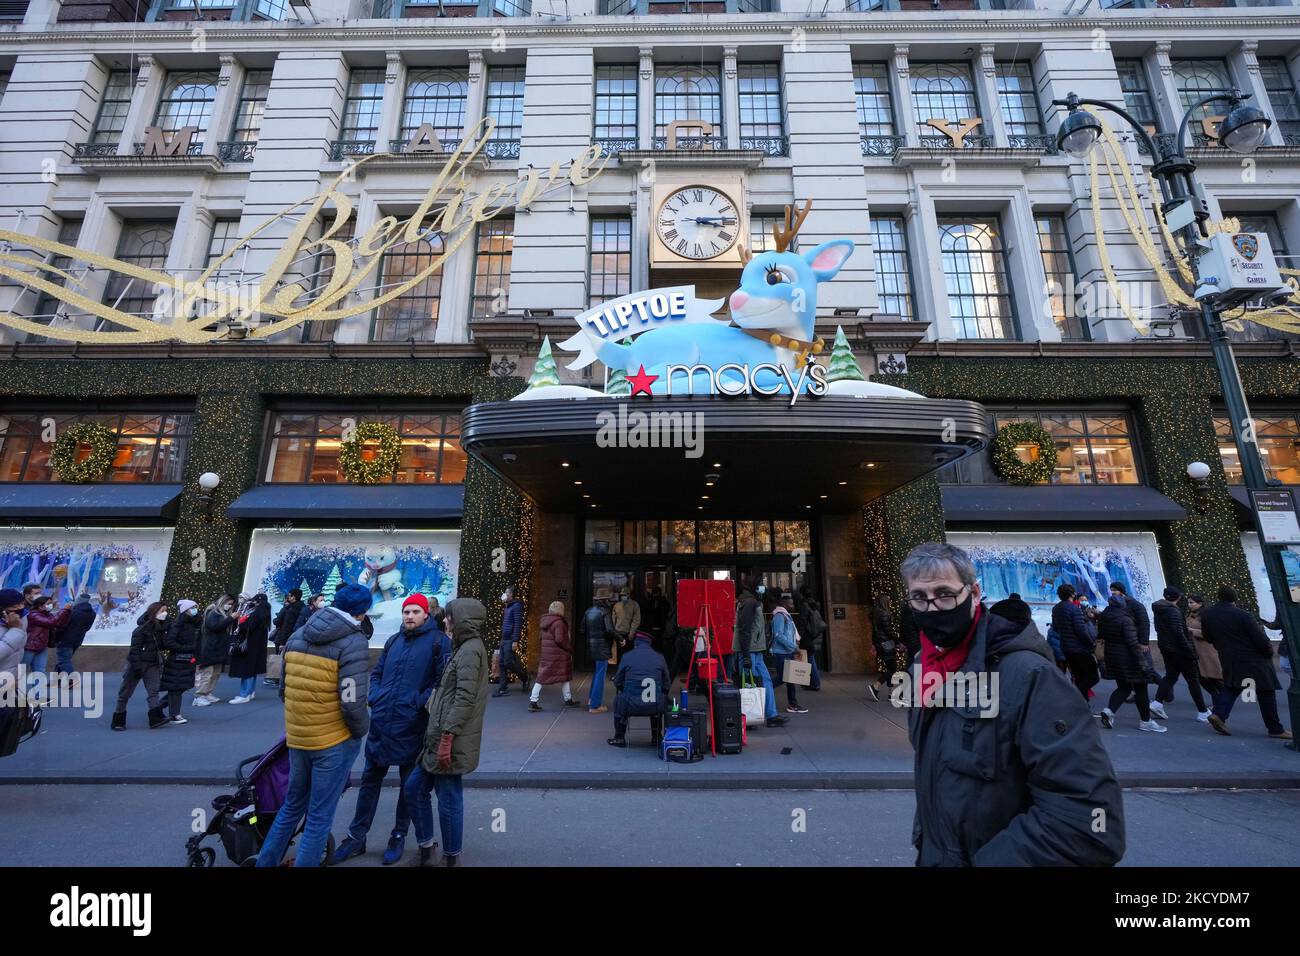 Pedestrians view the holiday windows at the Macy's Inc. flagship department store in the Herald Square area of New York, U.S., on Thursday, Dec. 23, 2021. U.S. retail sales strengthened from Nov. 3-23, rising 15.5% as an earlier holiday push, and concern over product shortages, may have pulled forward demand. (Photo by John Nacion/NurPhoto) Stock Photo